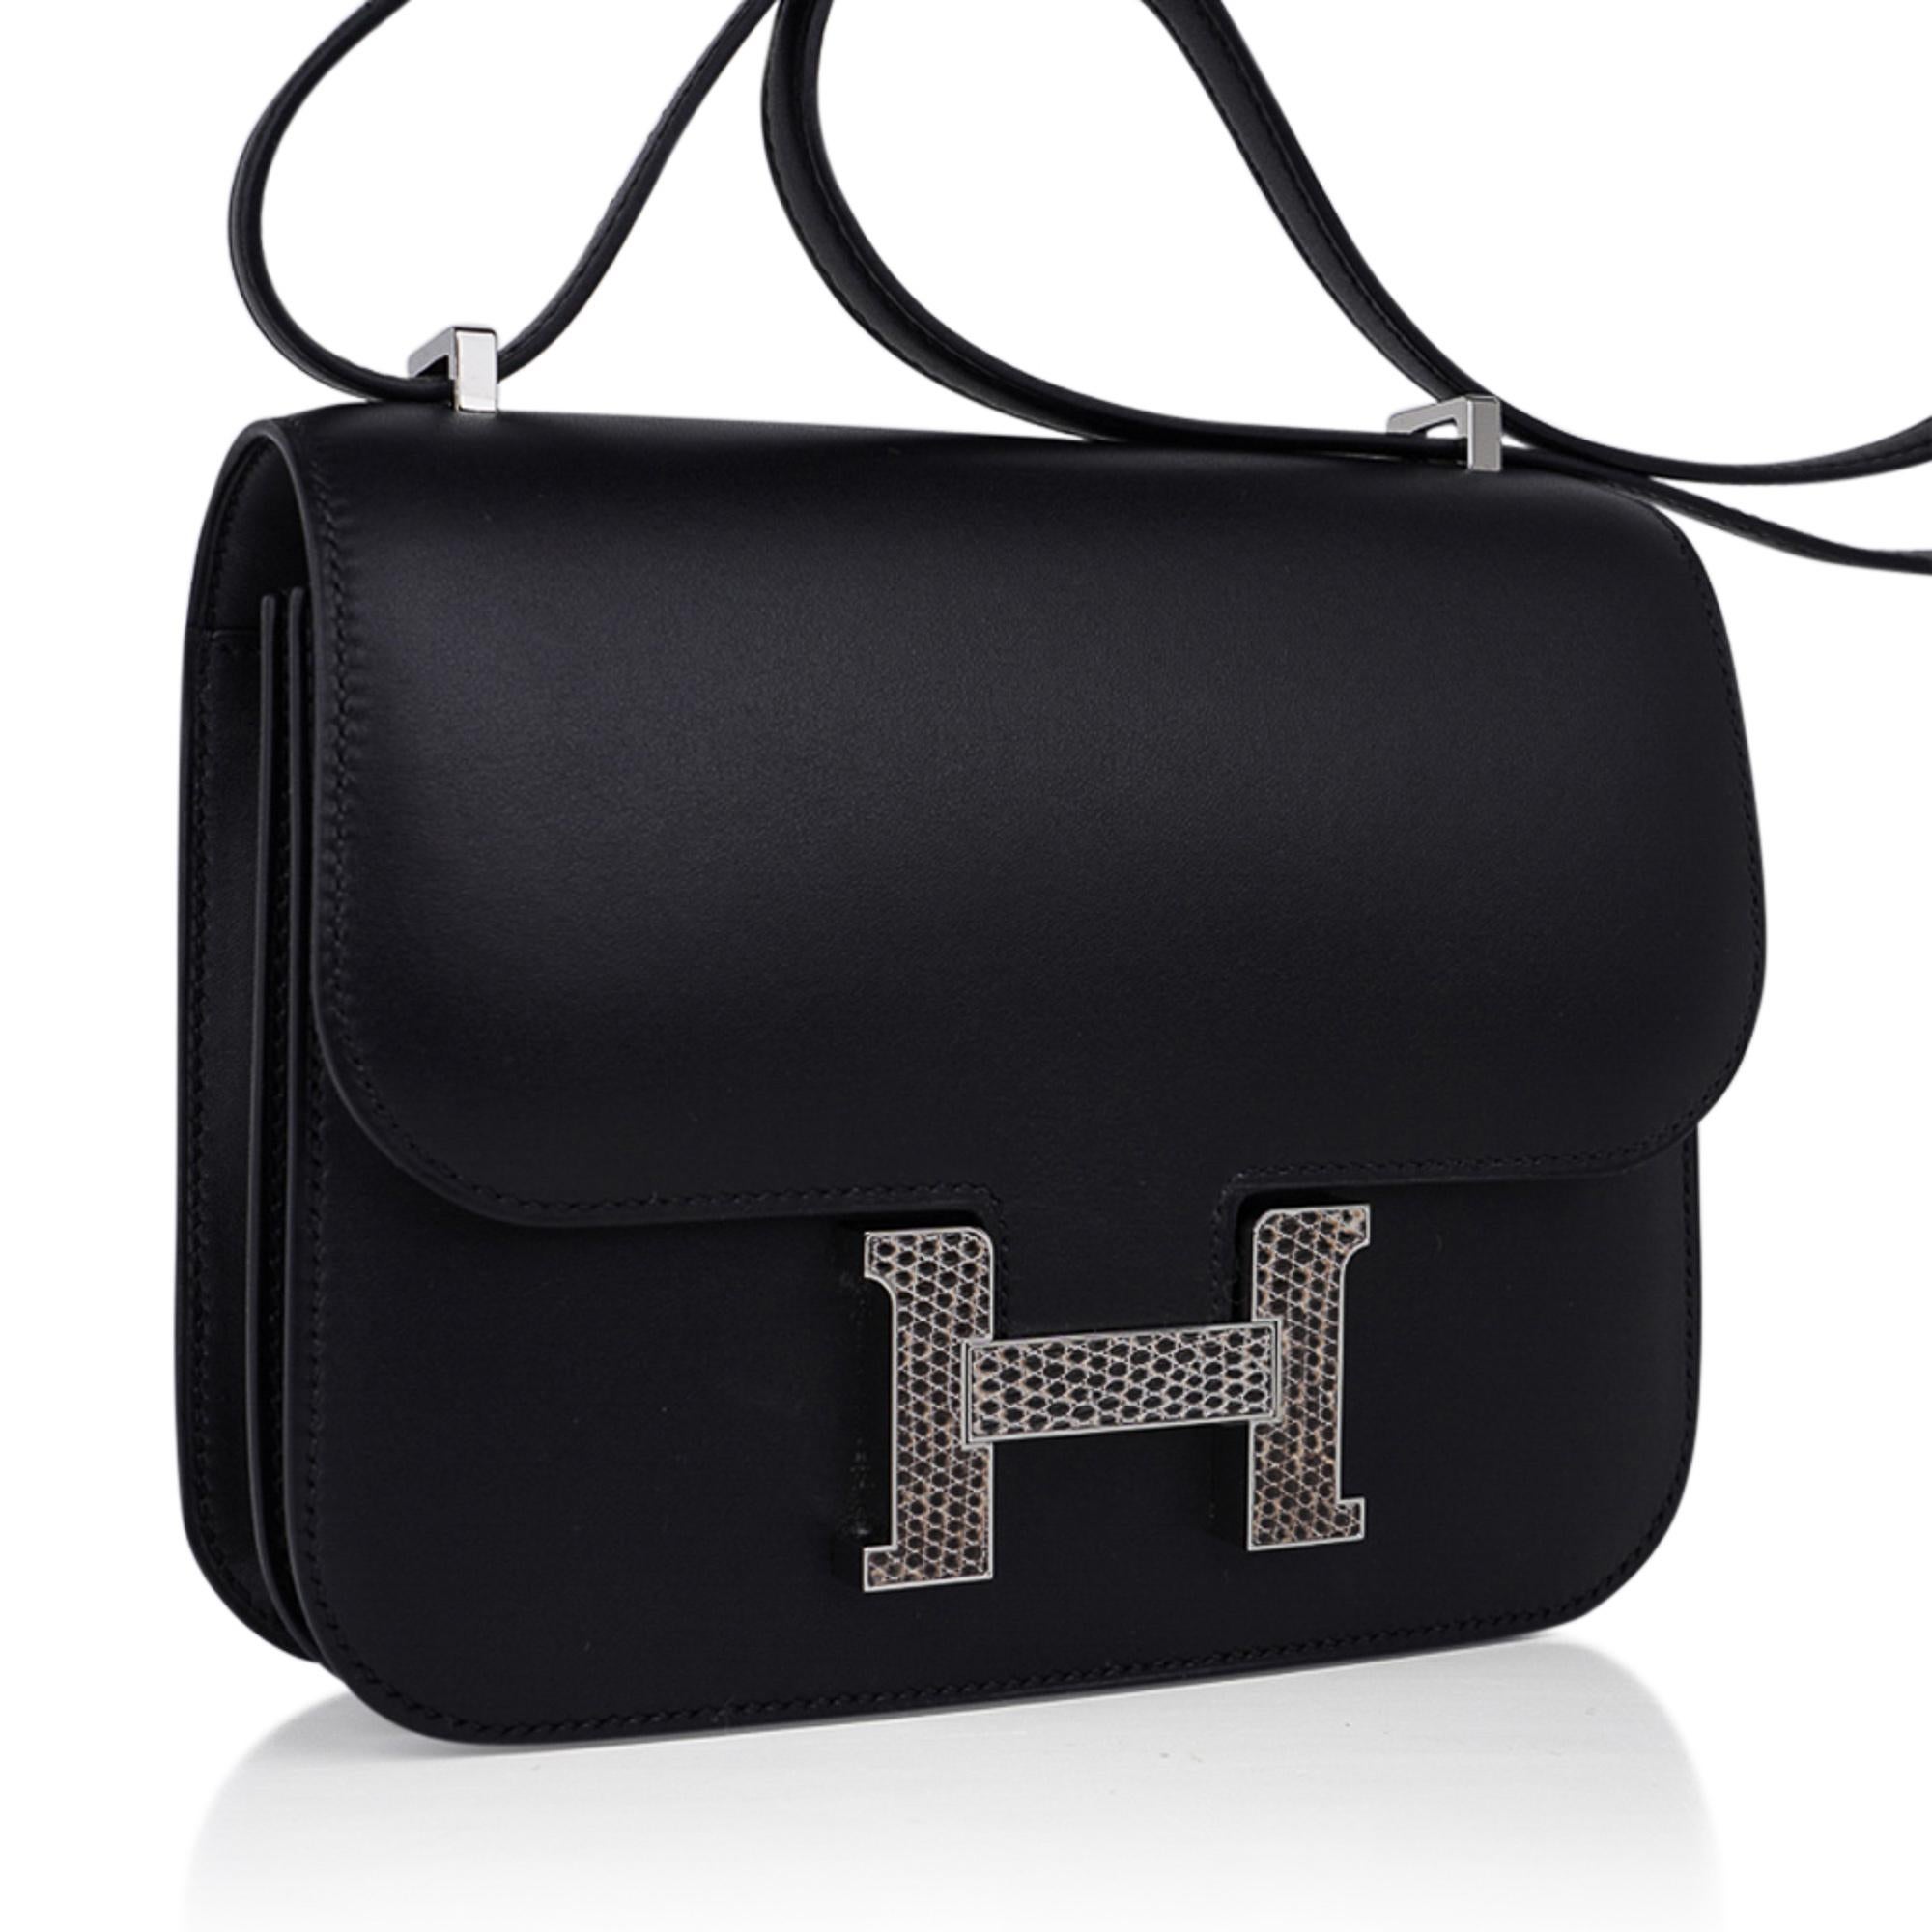 Mightychic offers an Hermes Constance 18 bag featured in Black Madame leather.
SO chic with the Ombre Lizard buckle trimmed in Palladium.
Carried by hand, over the shoulder, or crossbody.
HERMES PARIS MADE IN FRANCE is stamped on front under